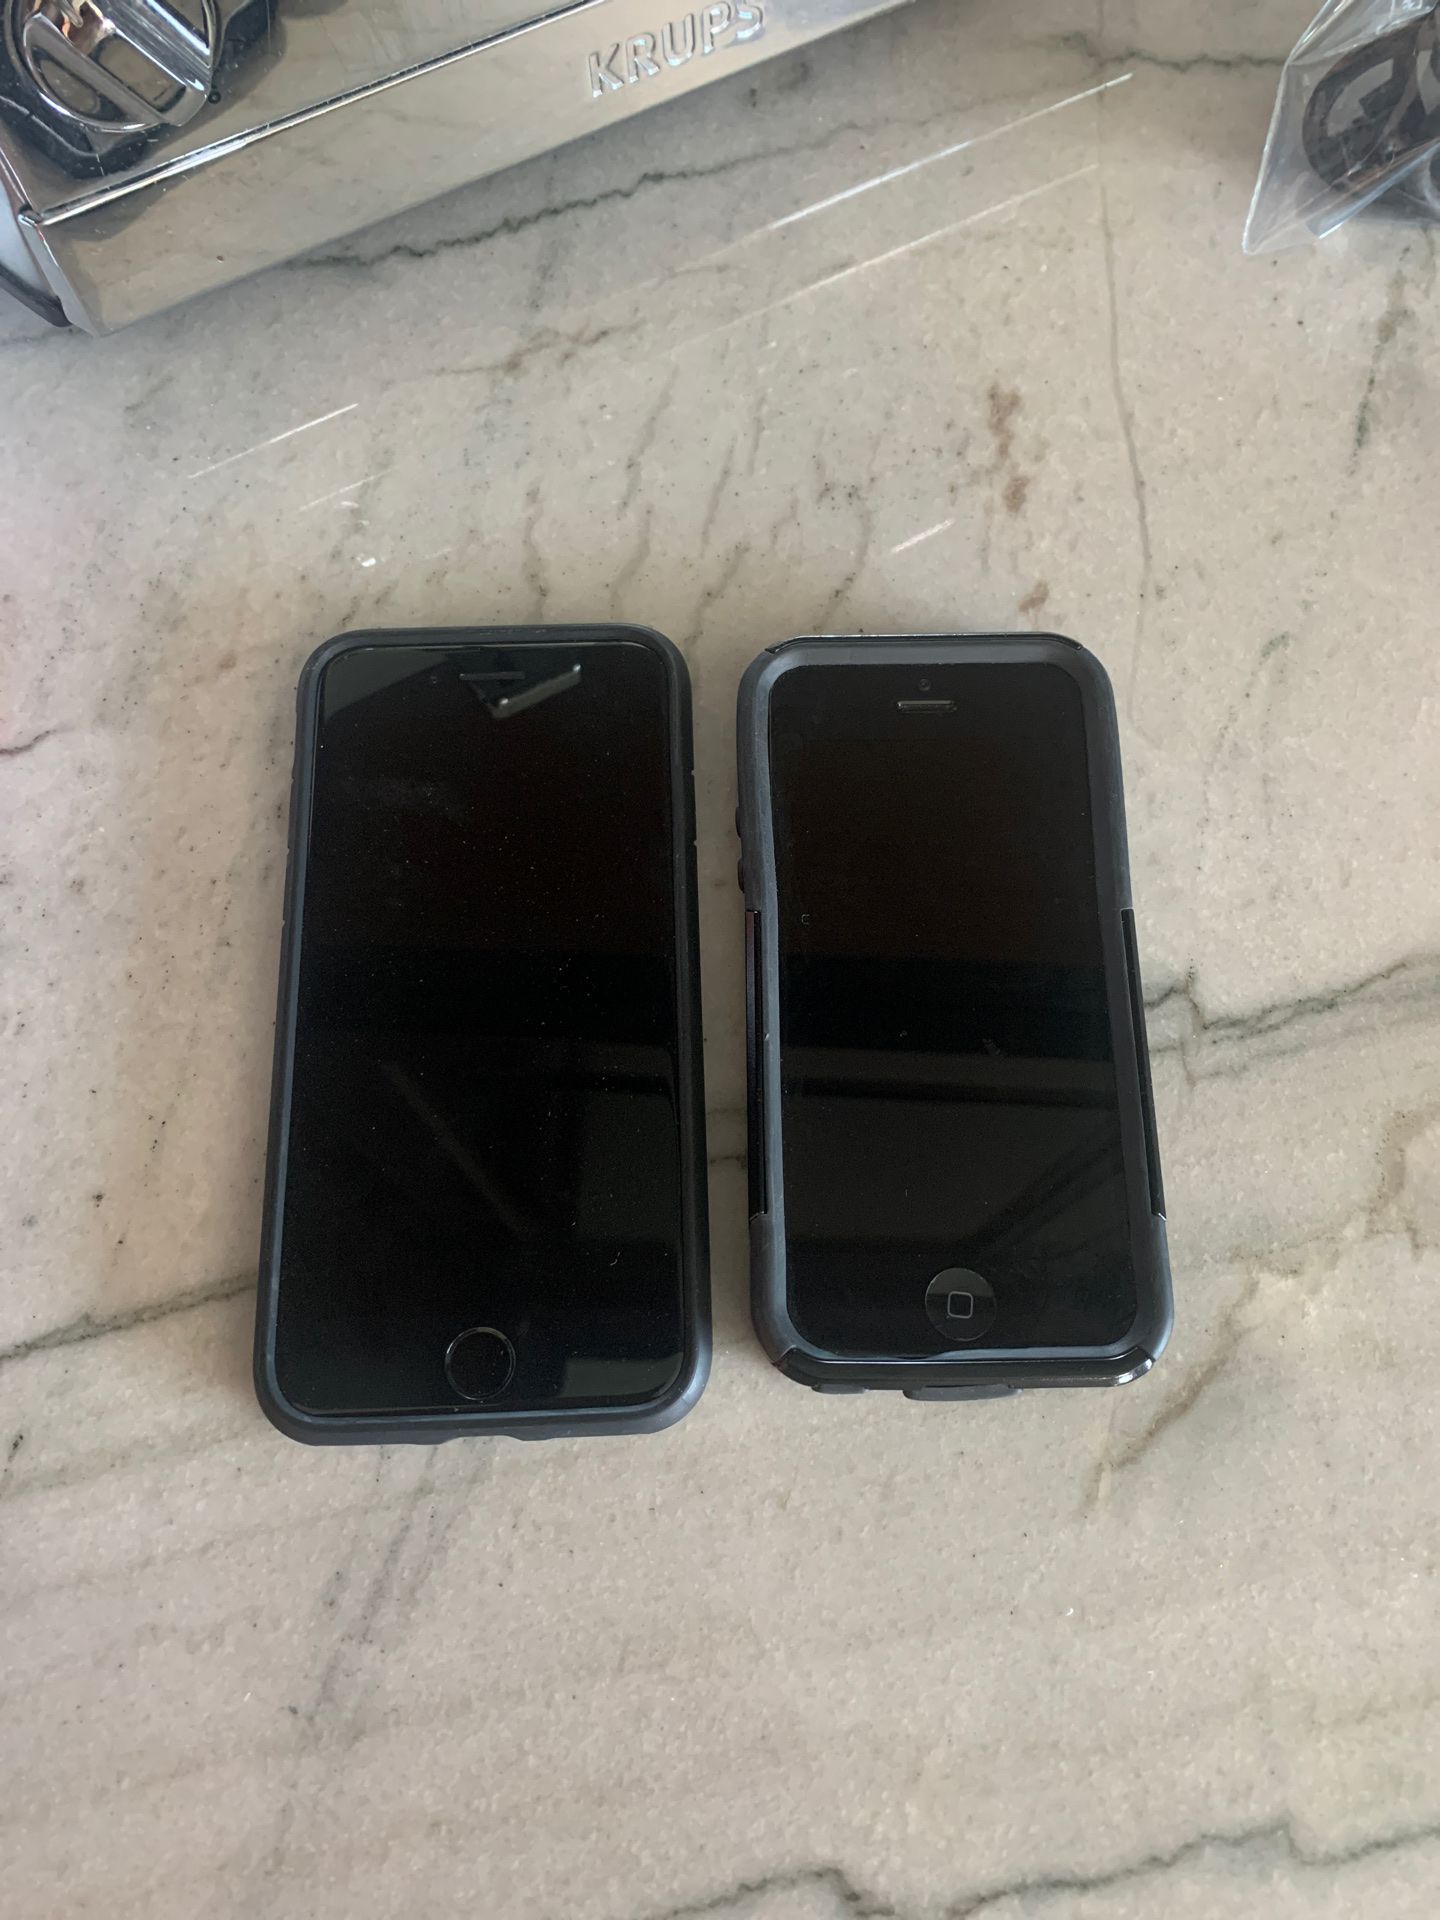 iPhone 5 & IPhone 7 (Just the Phone, you would need to add a carrier and a SIM card)